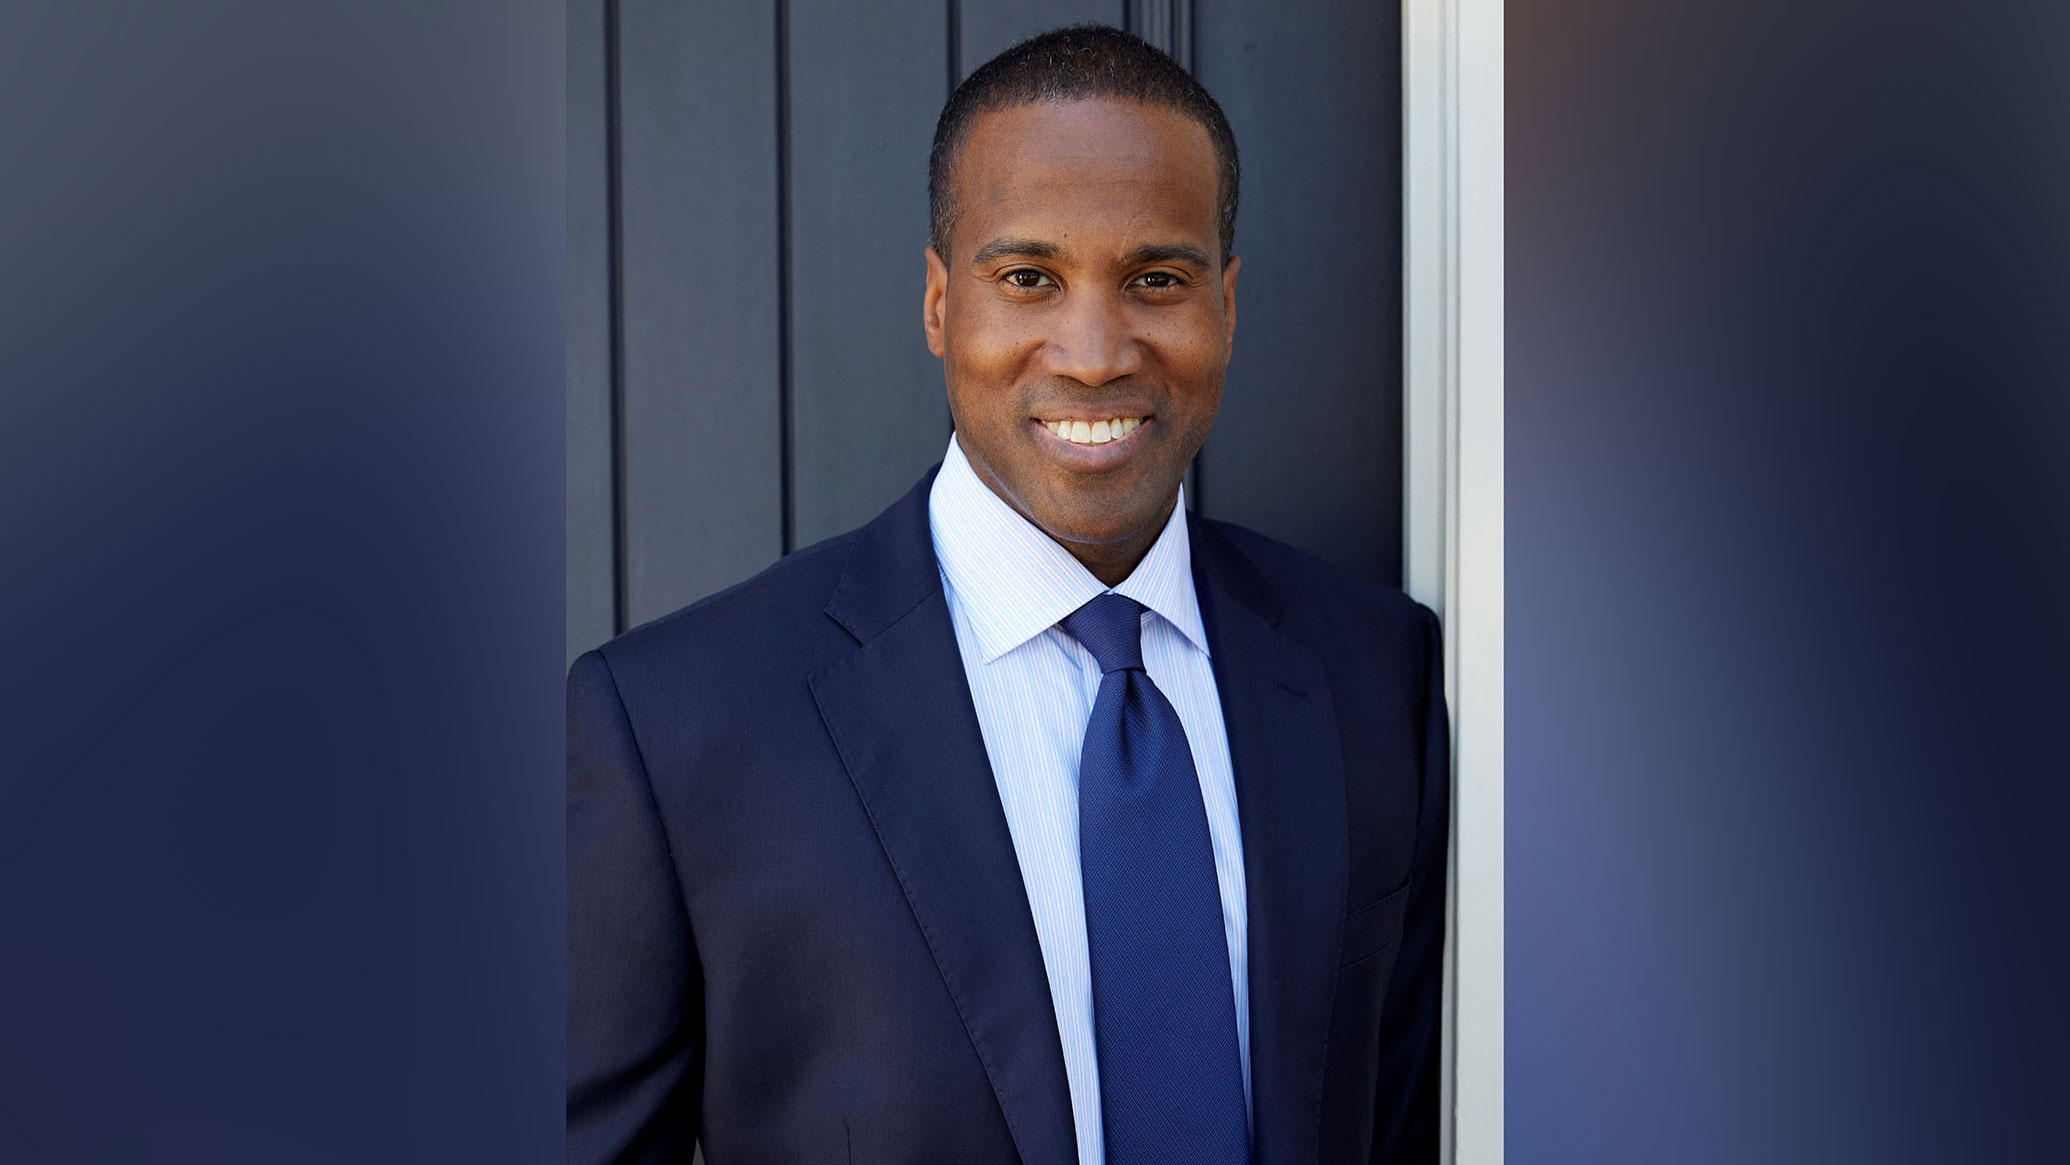 John James' win in Michigan is a pick up for the Republican Party.